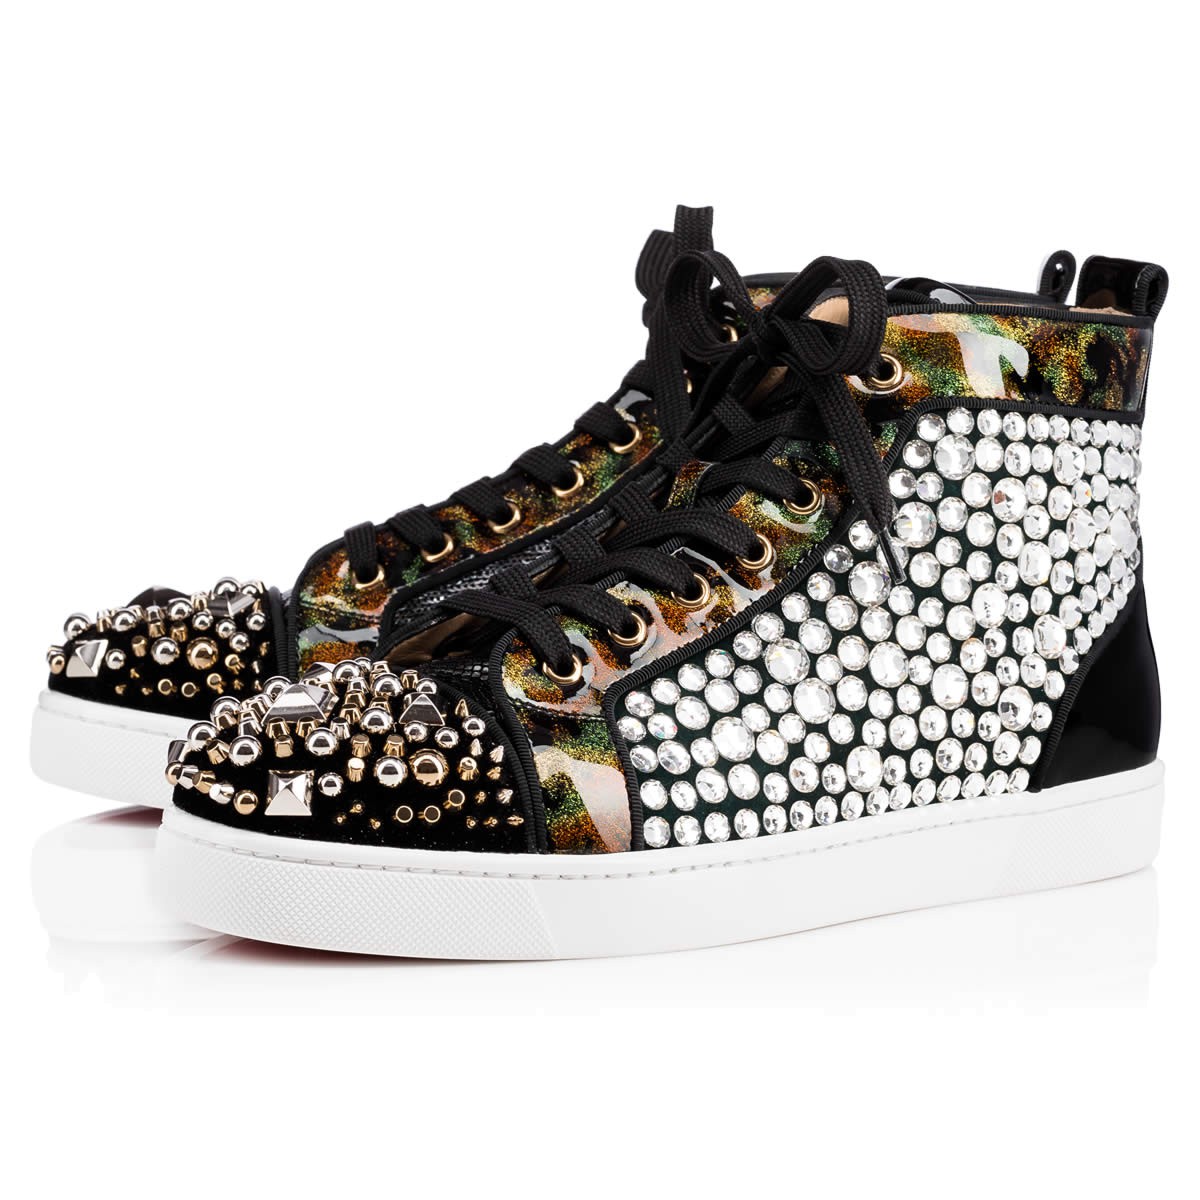 Christian Louboutin Sneakers: A Great Gift Idea